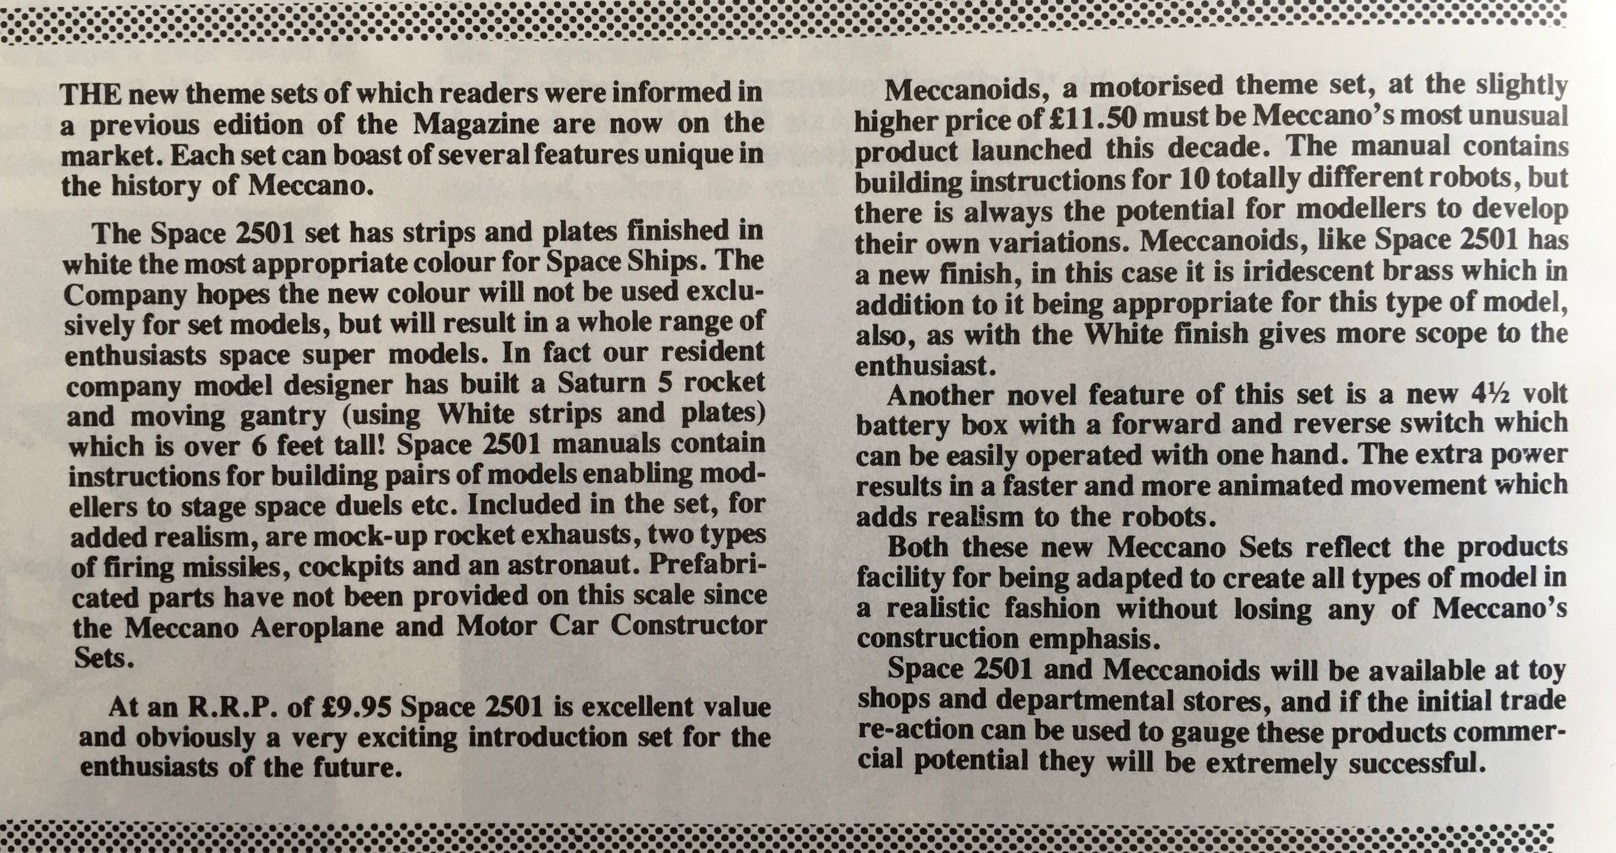 Meccano magazine article from October 1979 with prices